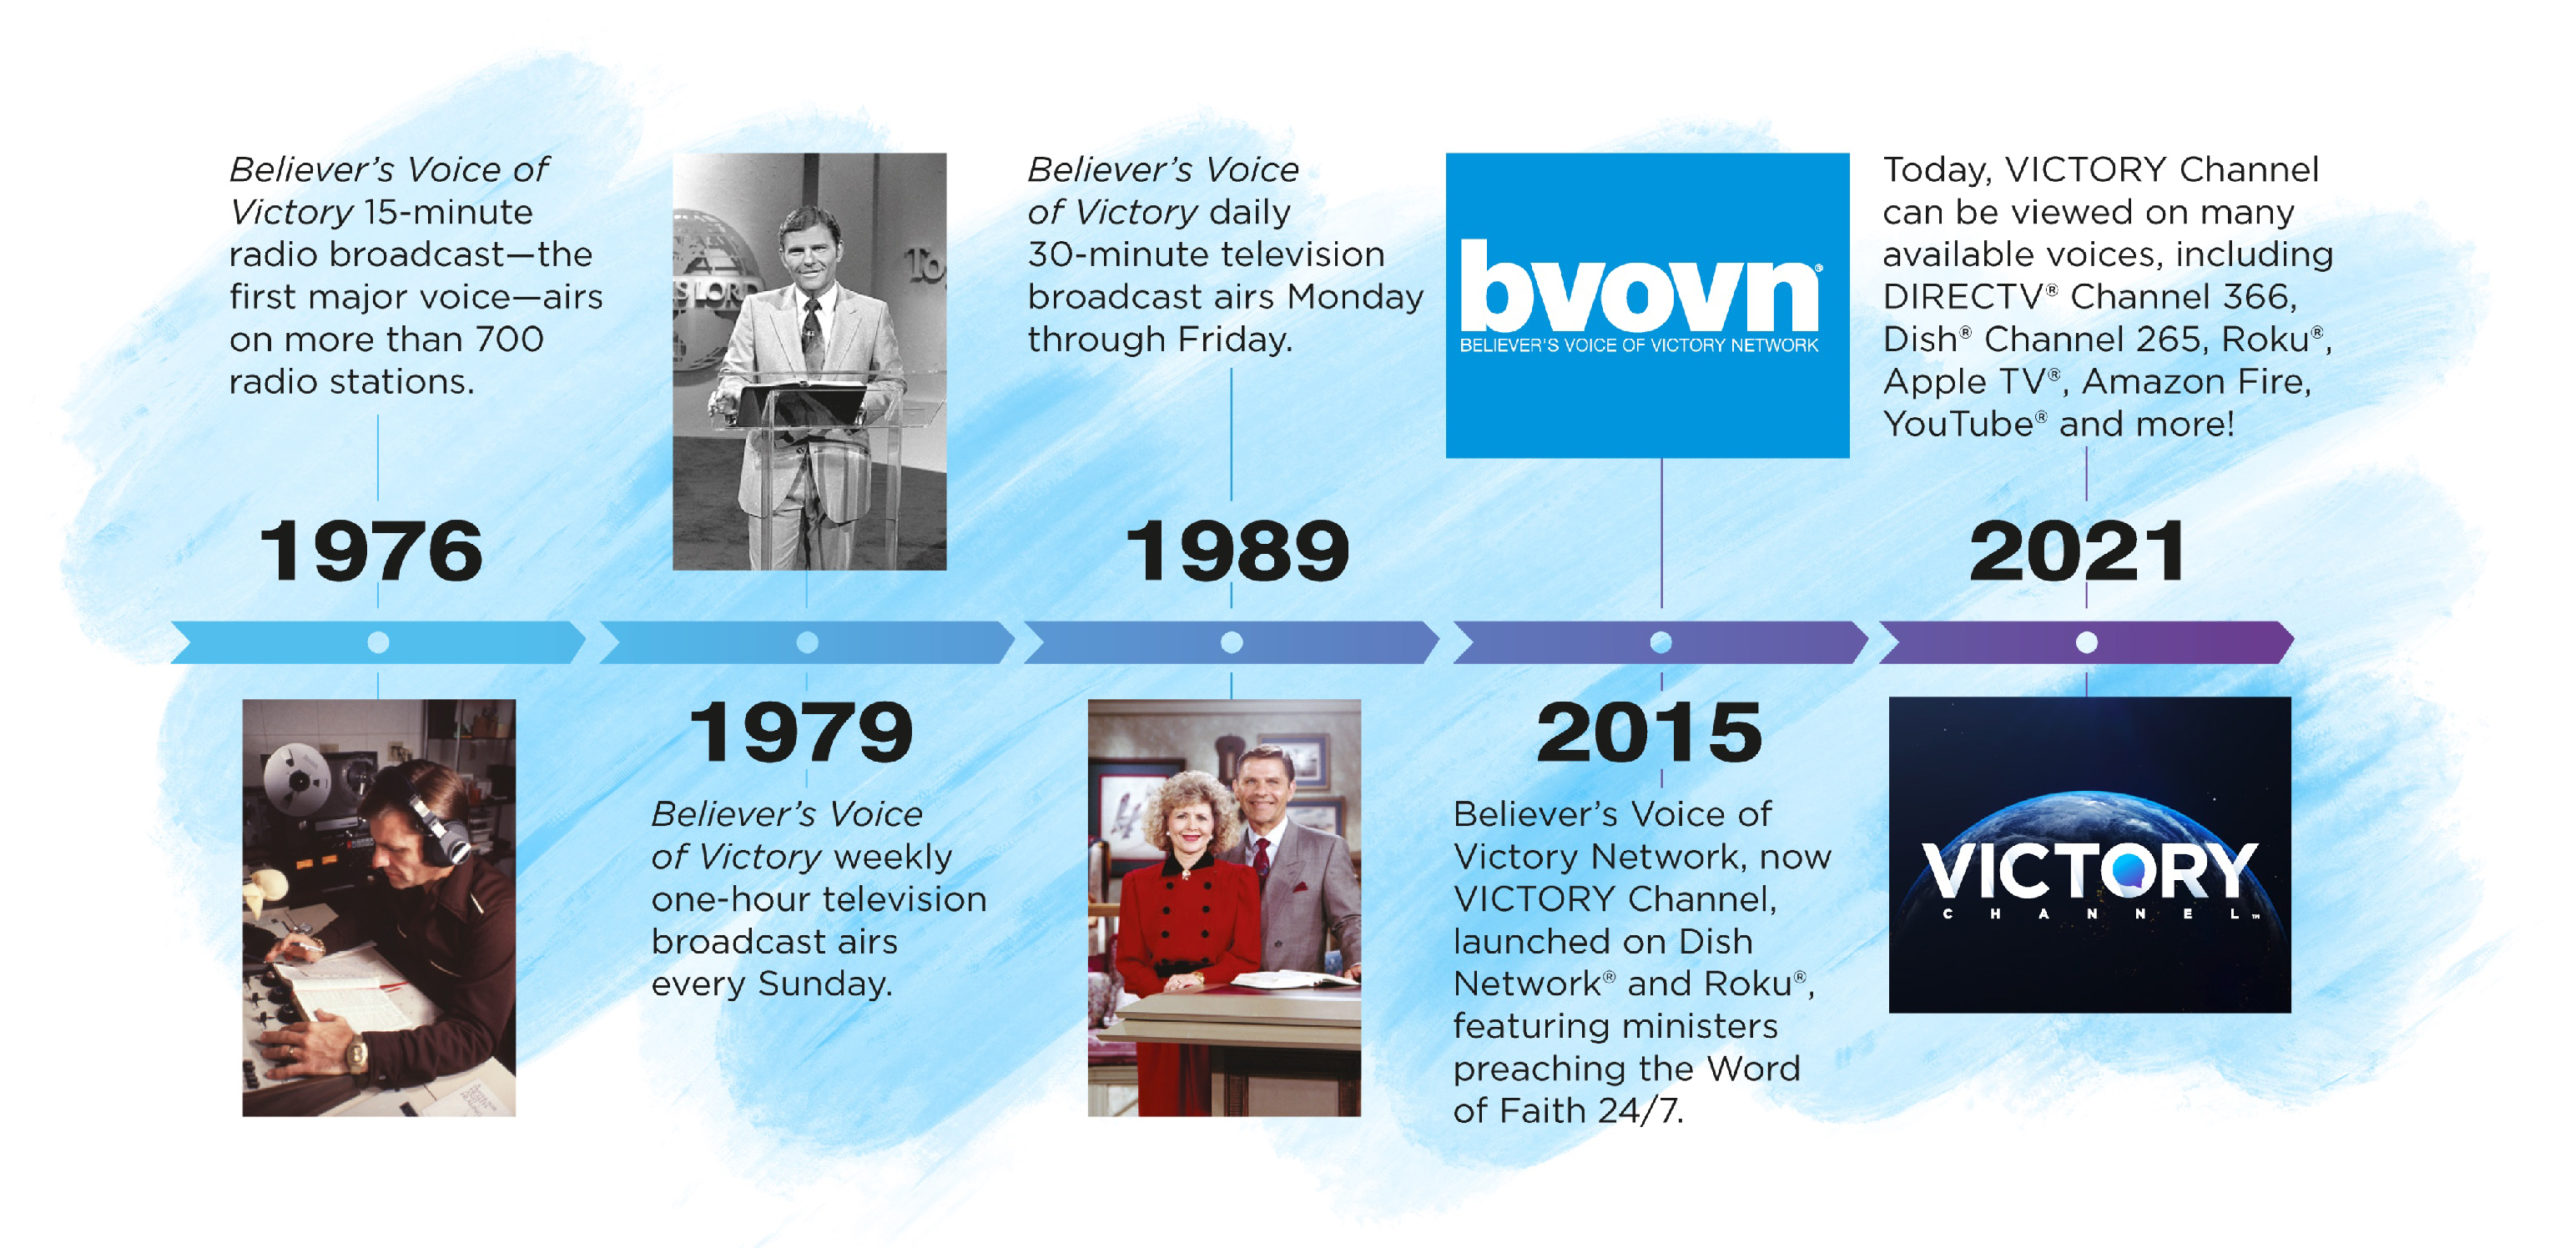 Believer's Voice of Victory - history timeline